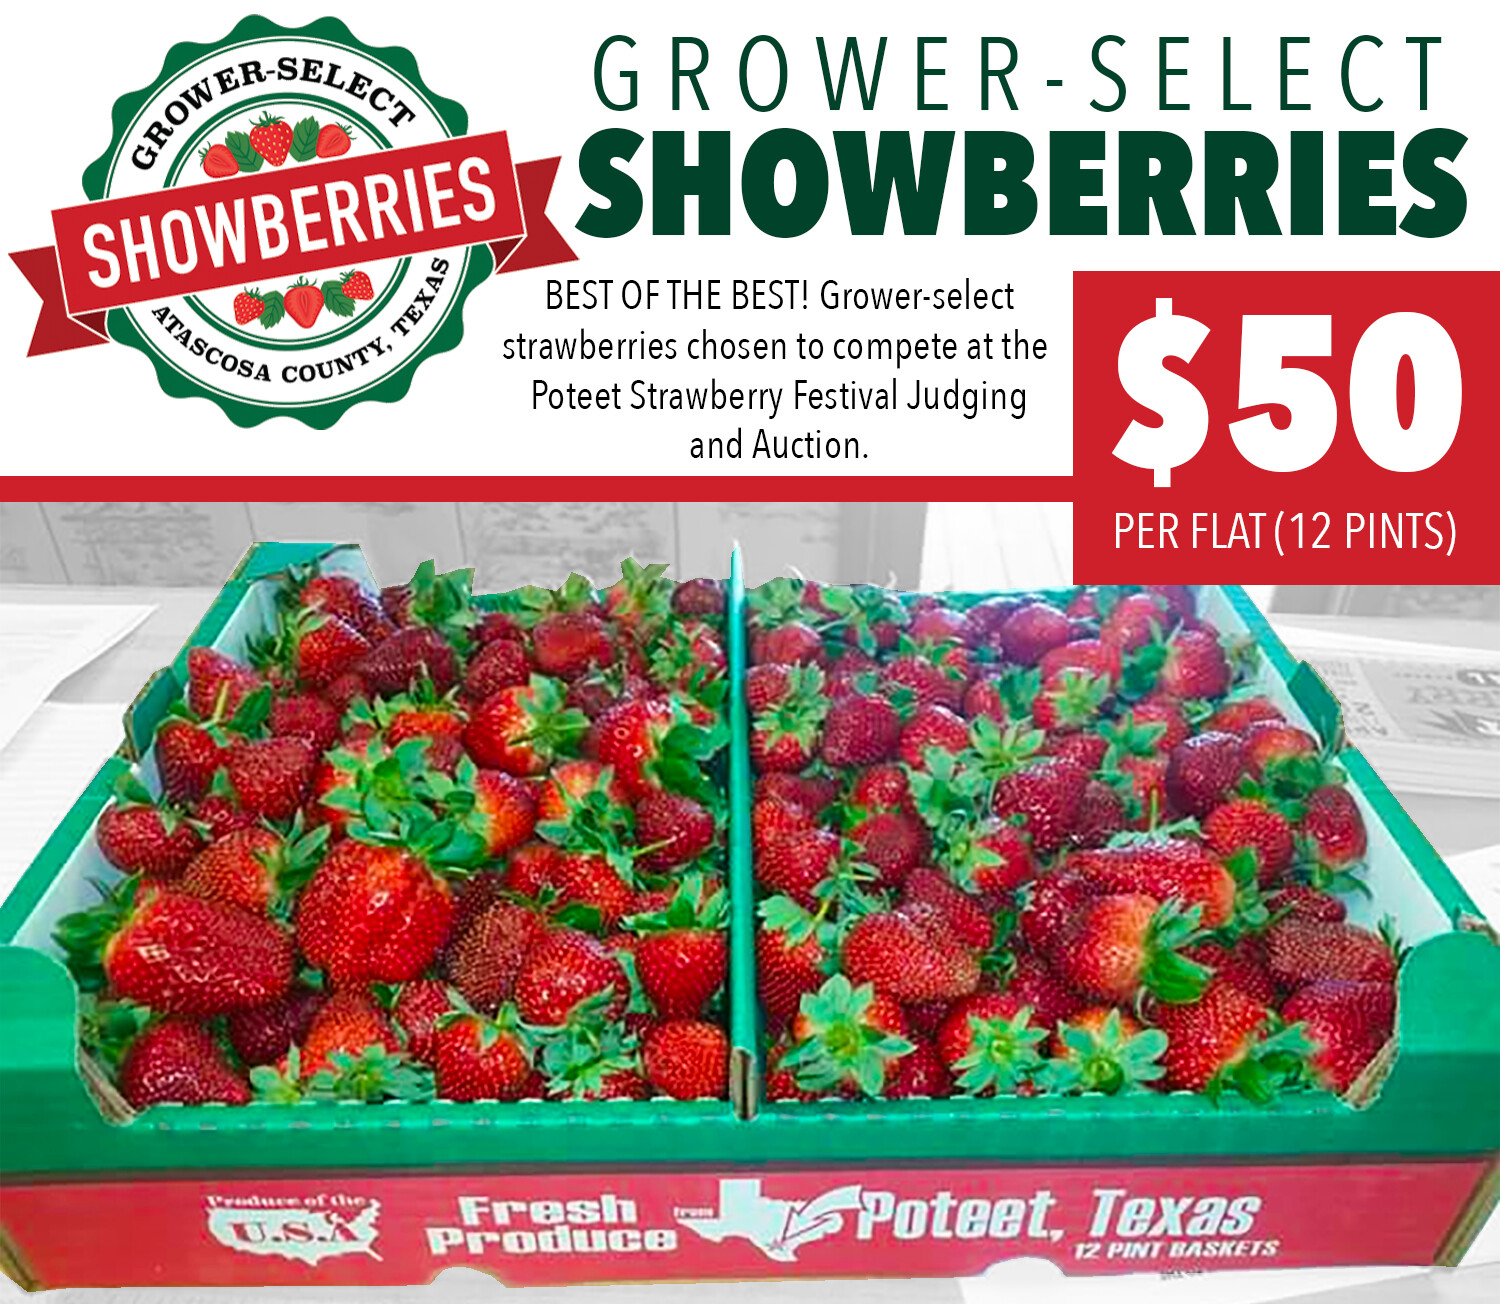 Grower-Select: SHOWBERRIES